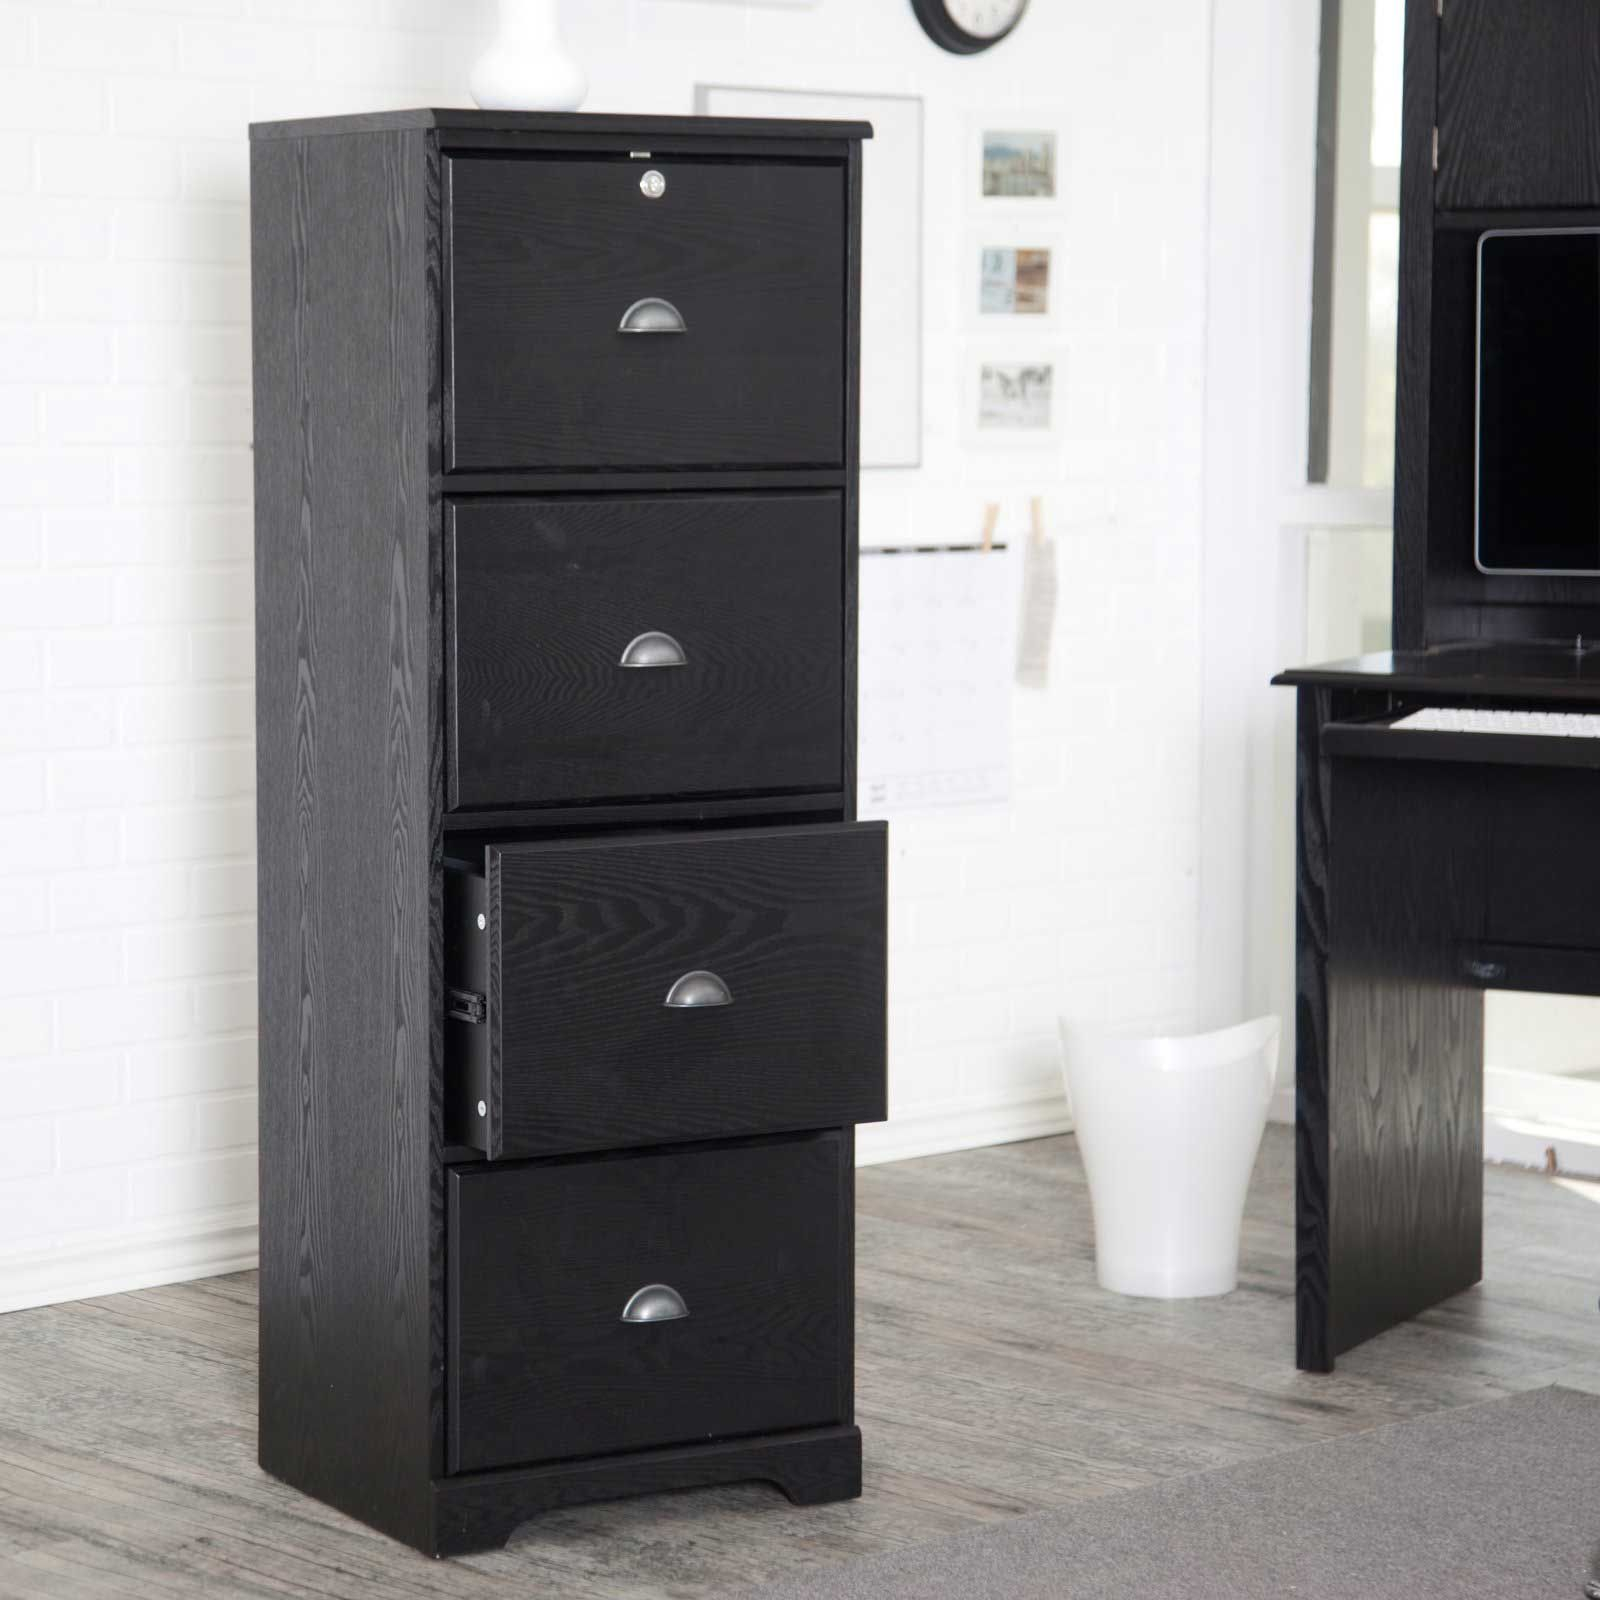 Hawthorne 4 Drawer Solid Wood Black Vertical Filing Cabinets File pertaining to size 1600 X 1600